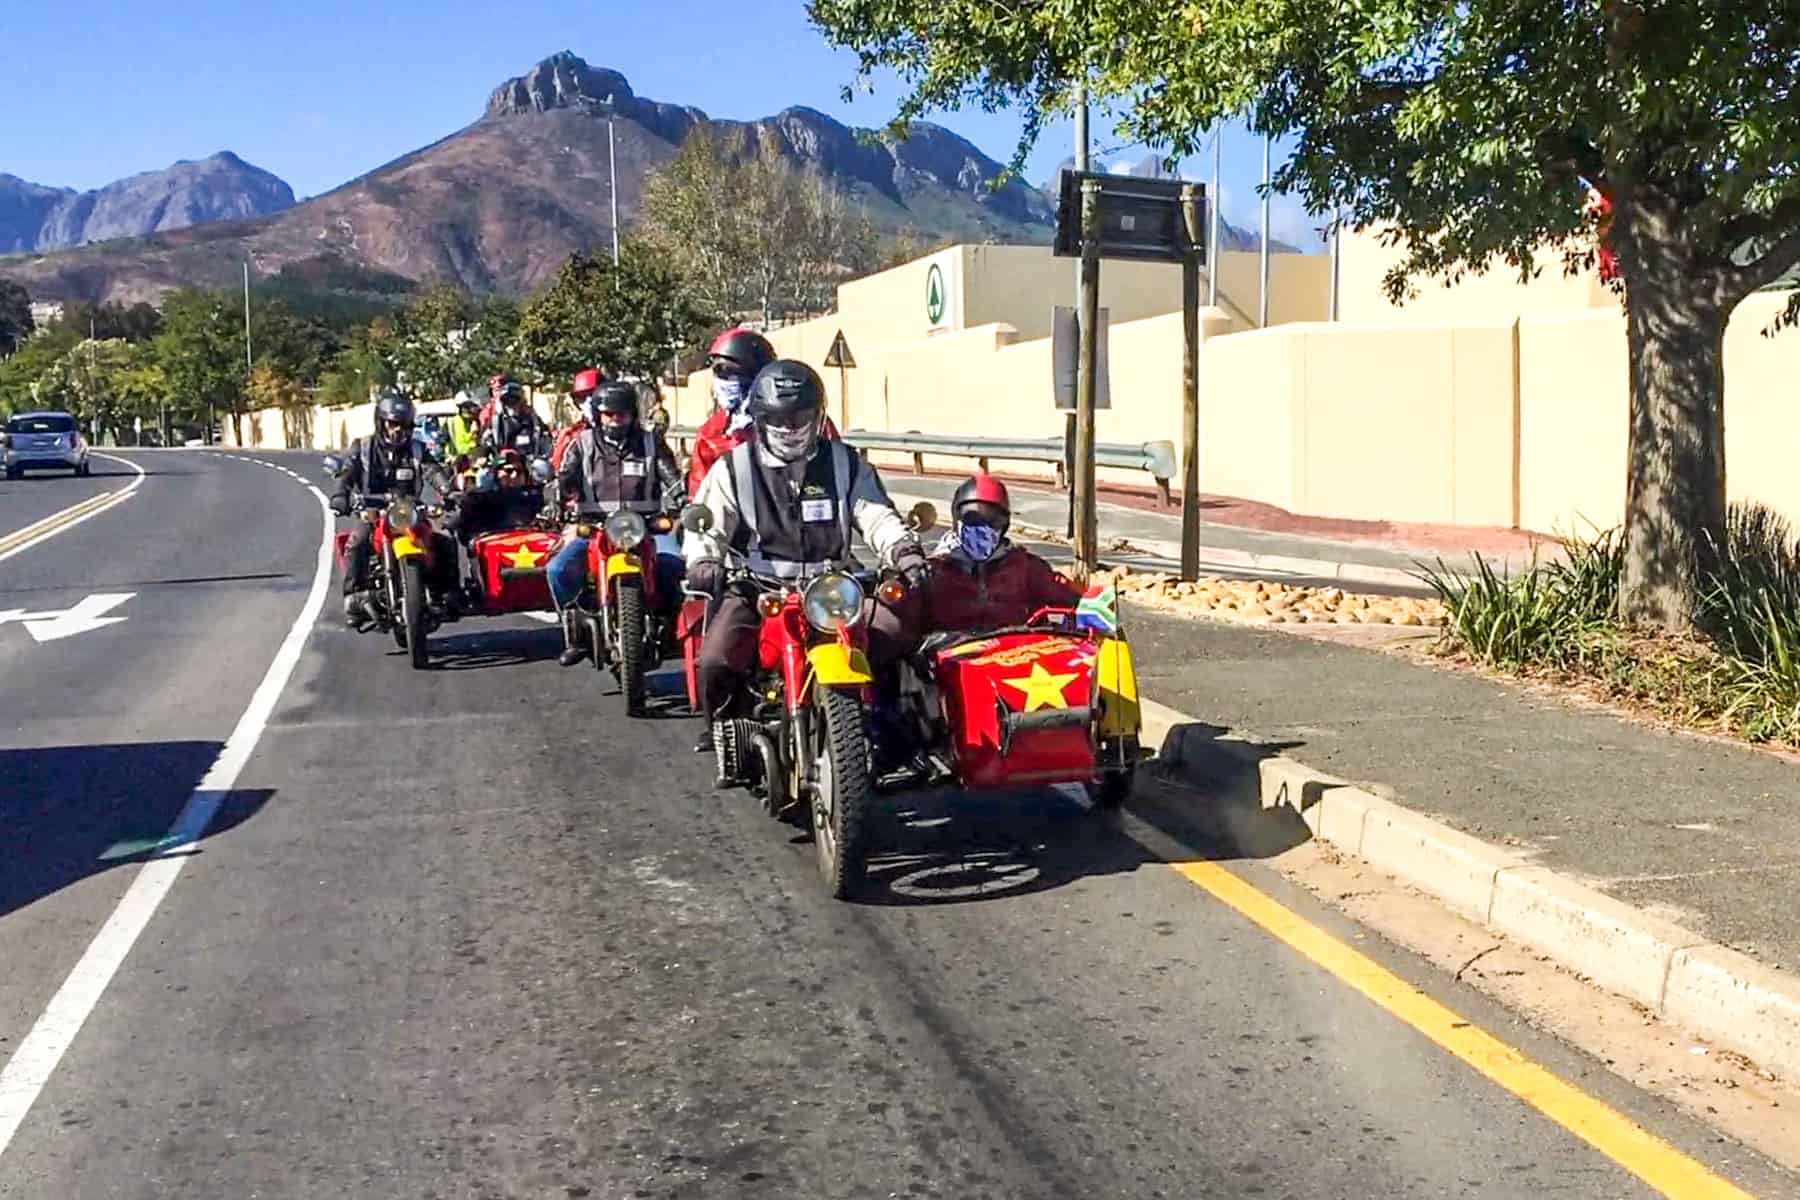 A group of people riding in red sidecars, attached to red motorbikes on a road through Stellenbosch, South Africa on a Cape Town day trip.